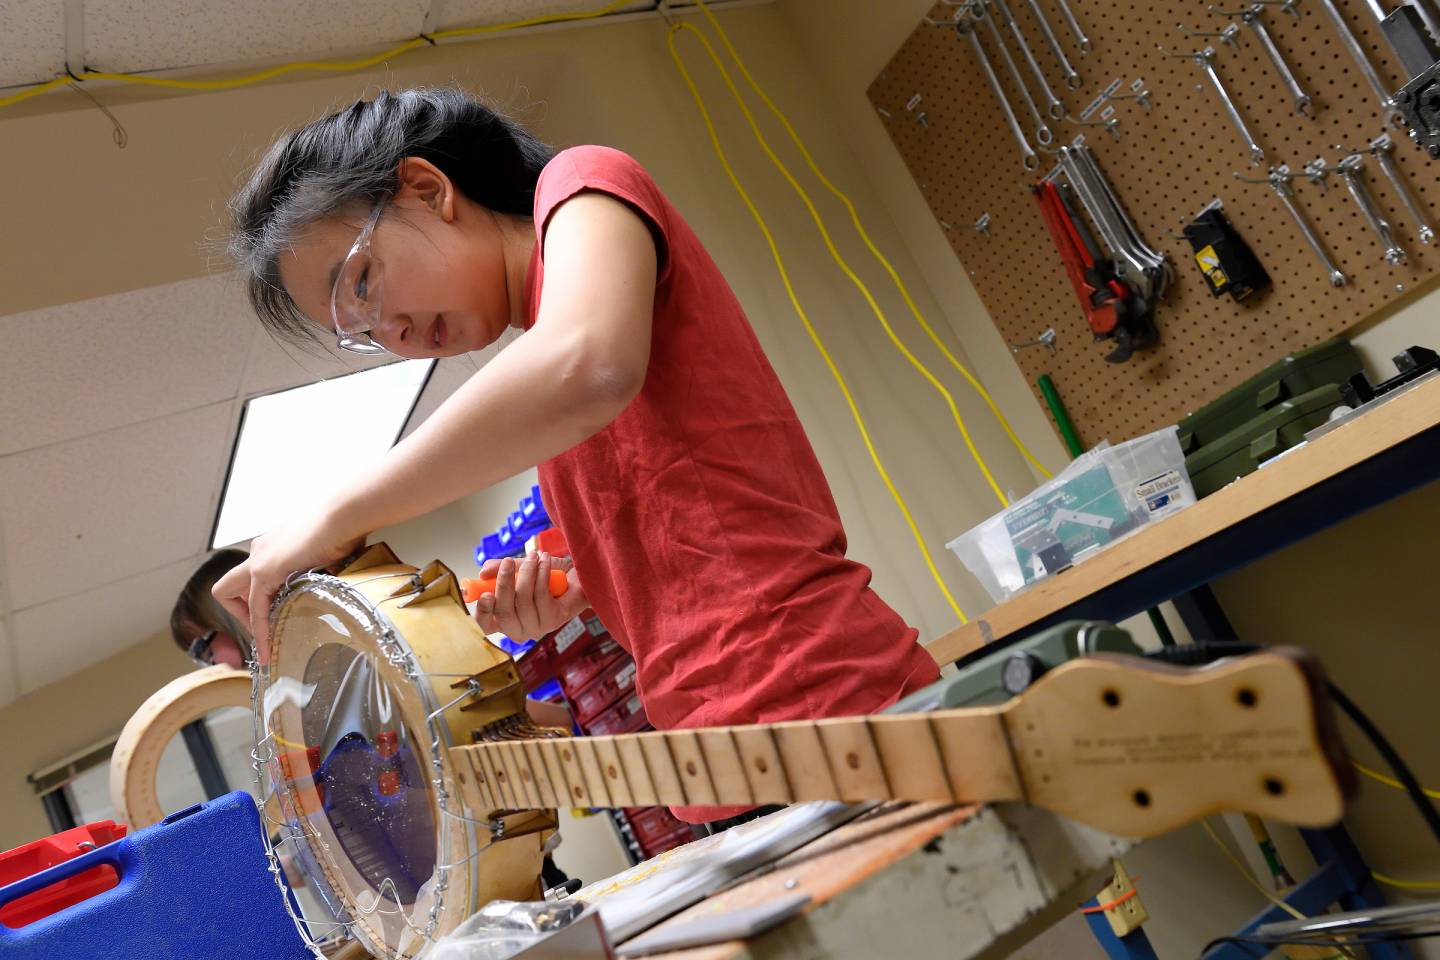 A student builds her own banjo